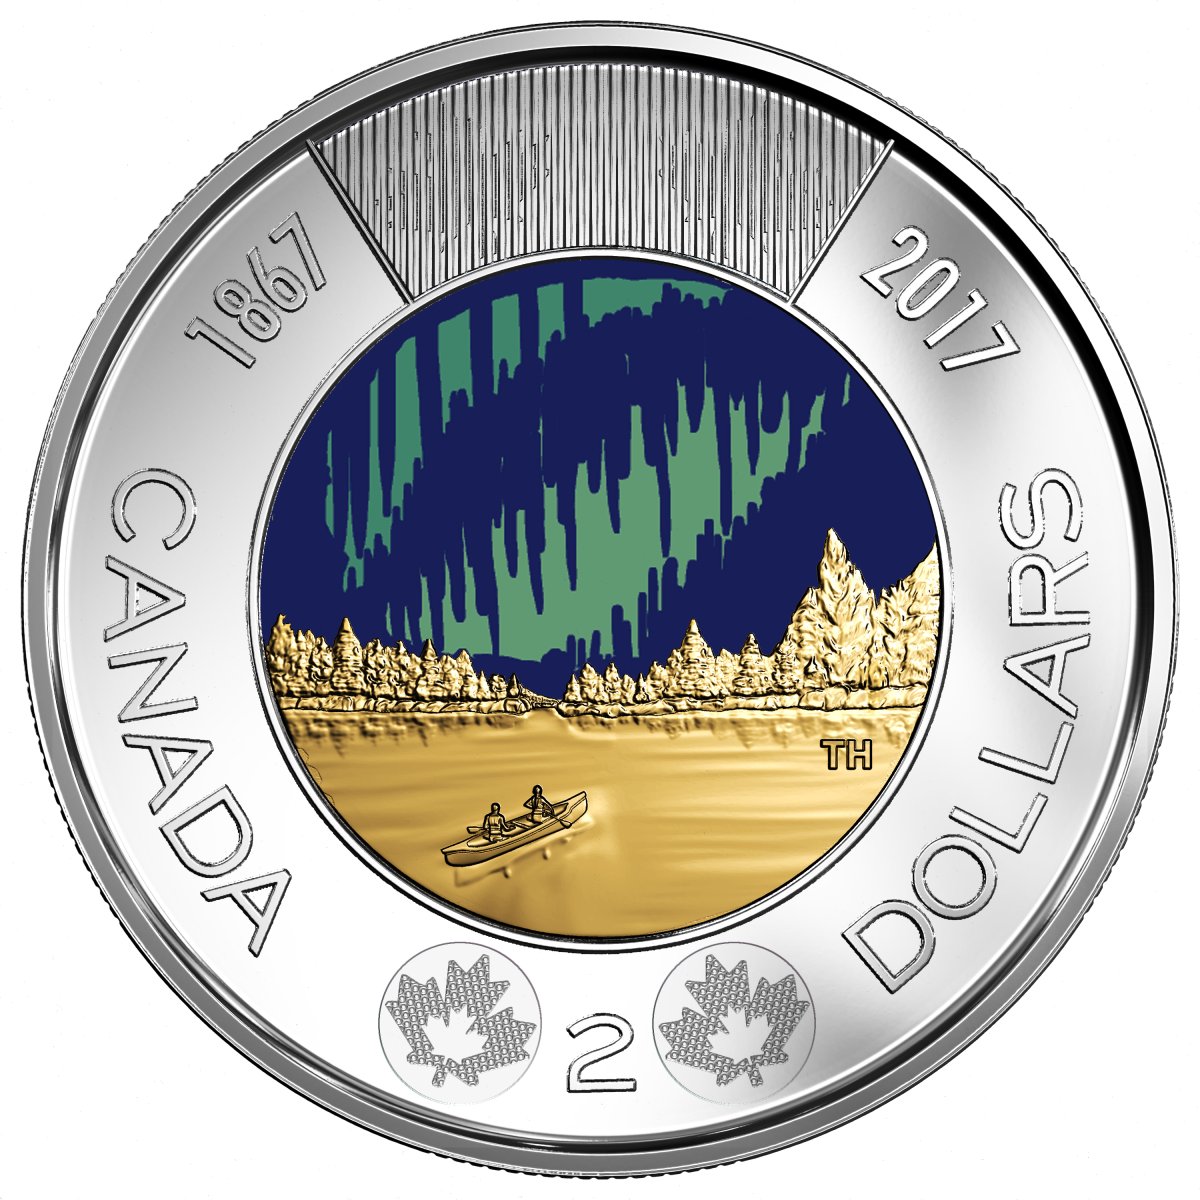 Design for the glow-in-the-dark Canada 150 commemorative Twoonie .